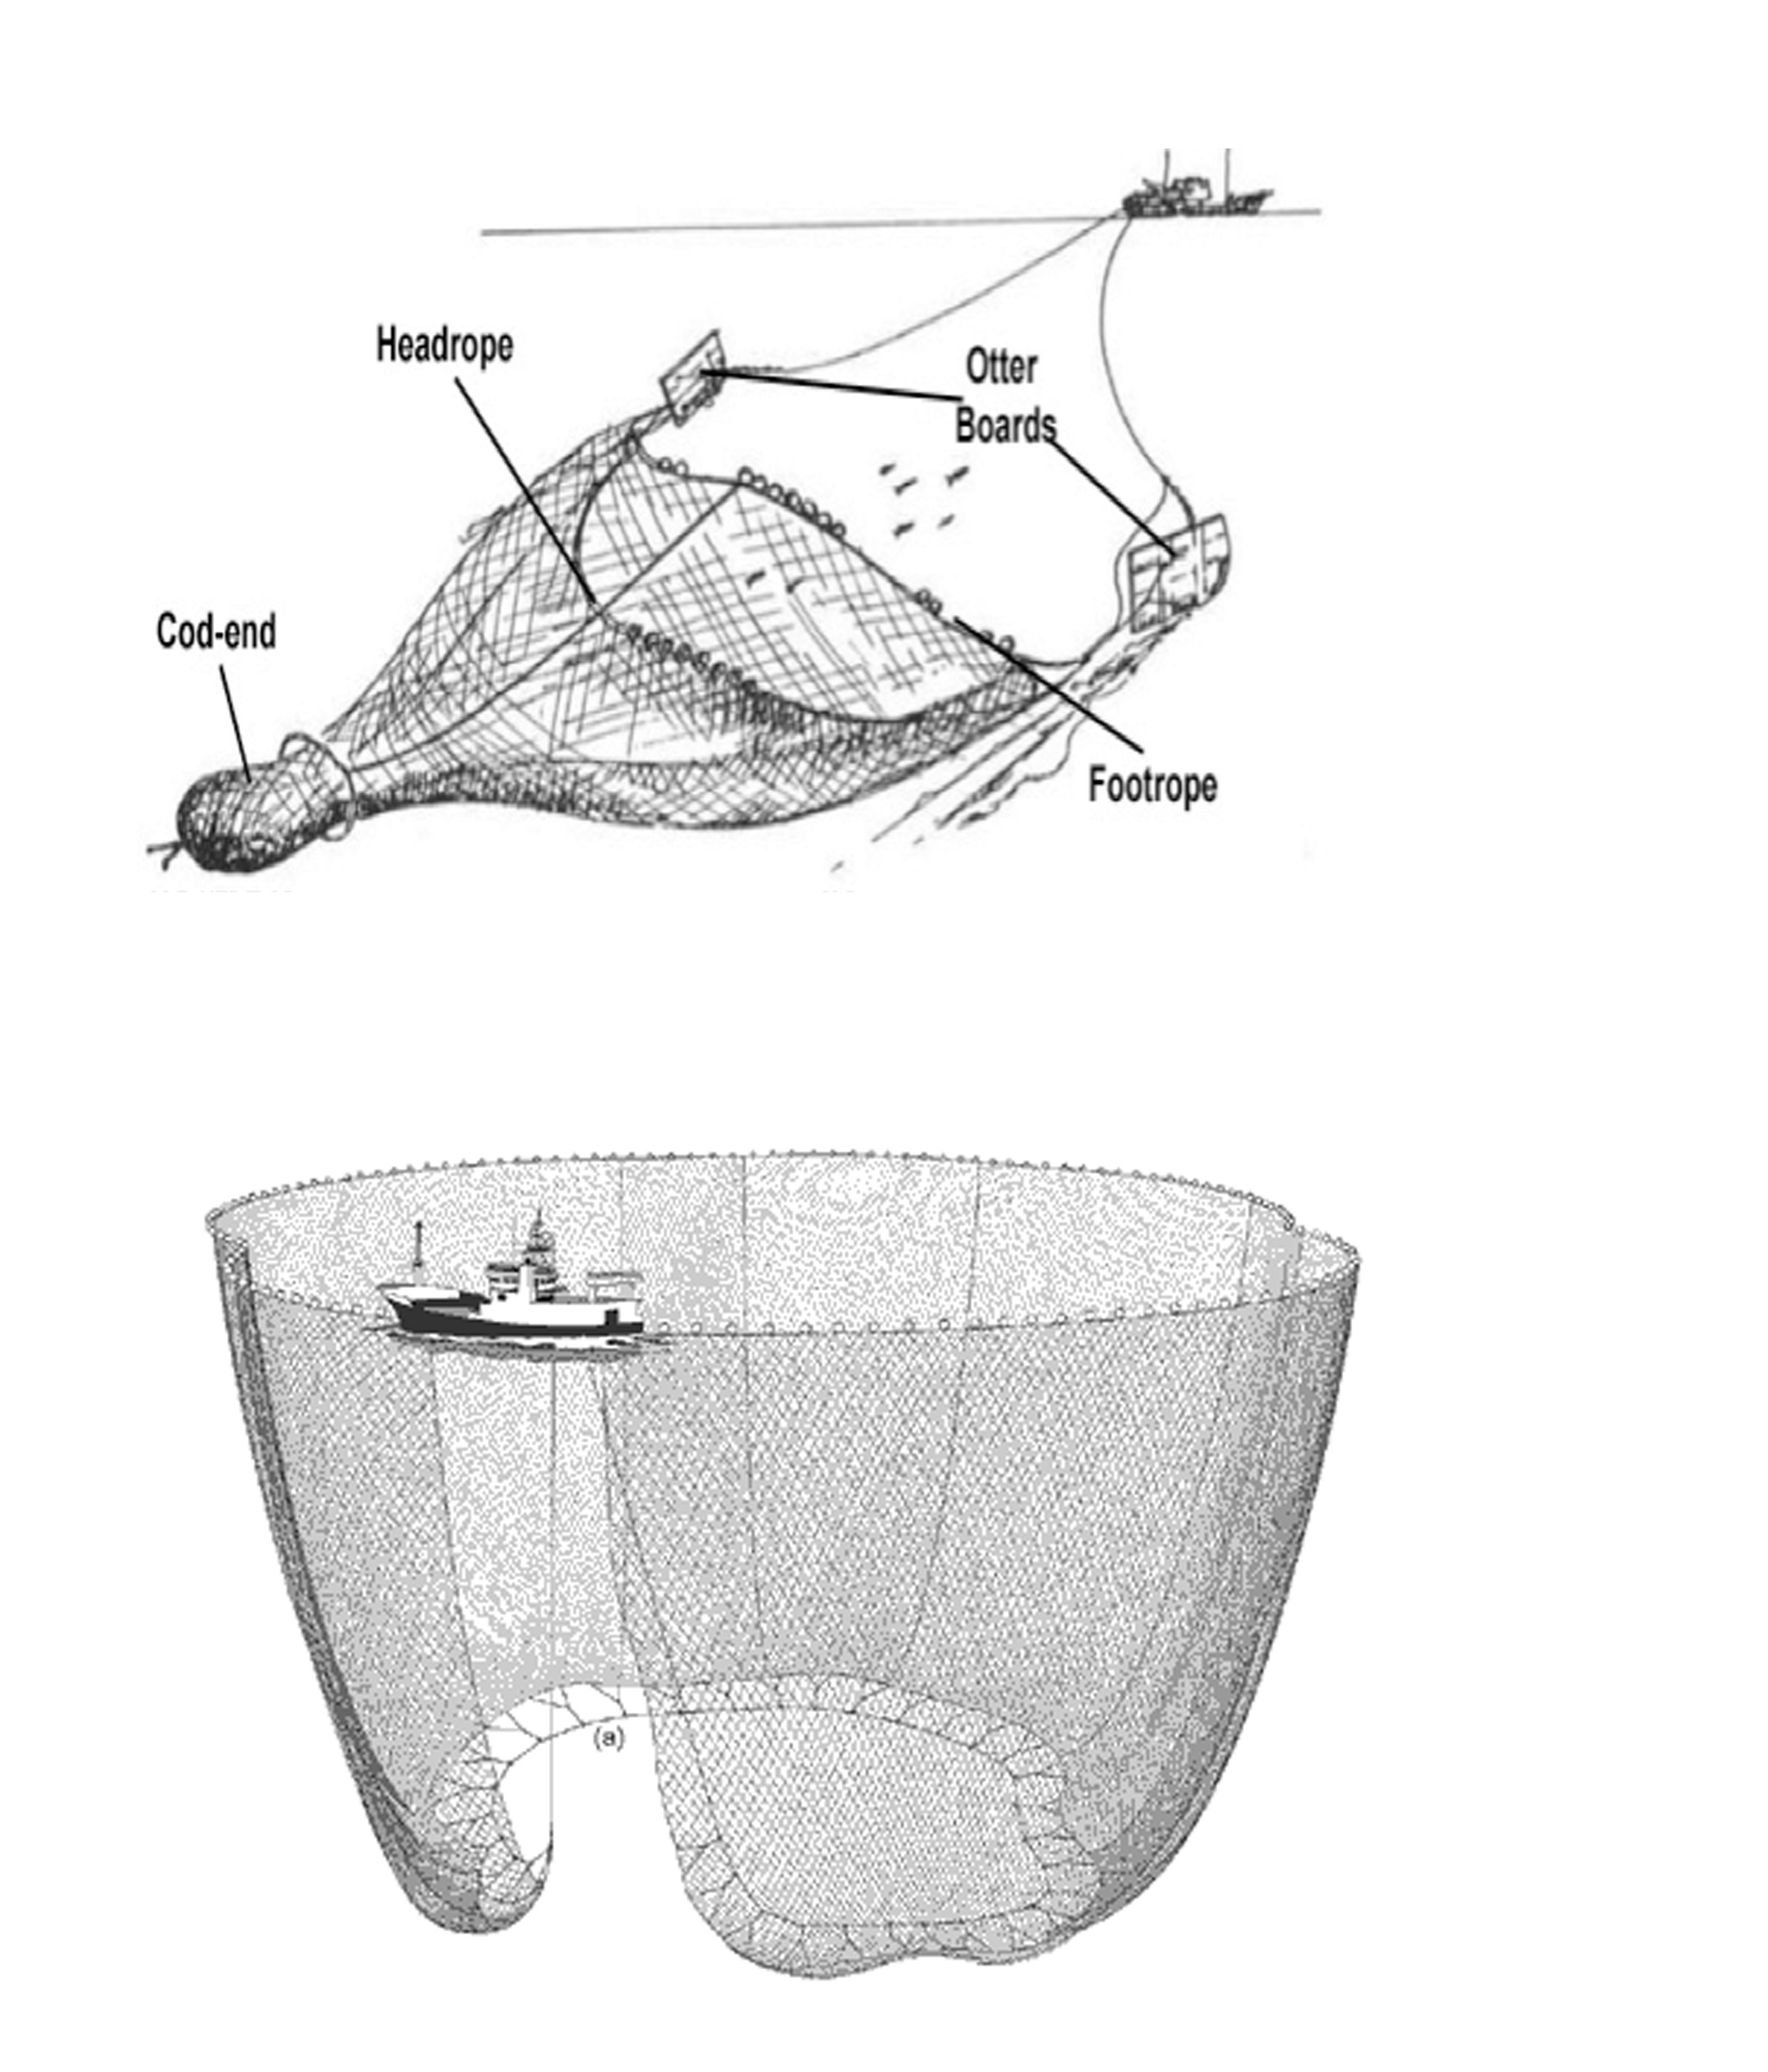 Top is a trawl net, bottom is a purse seine. Imgs from The Daily Catch and Gudangnya Ilmu.